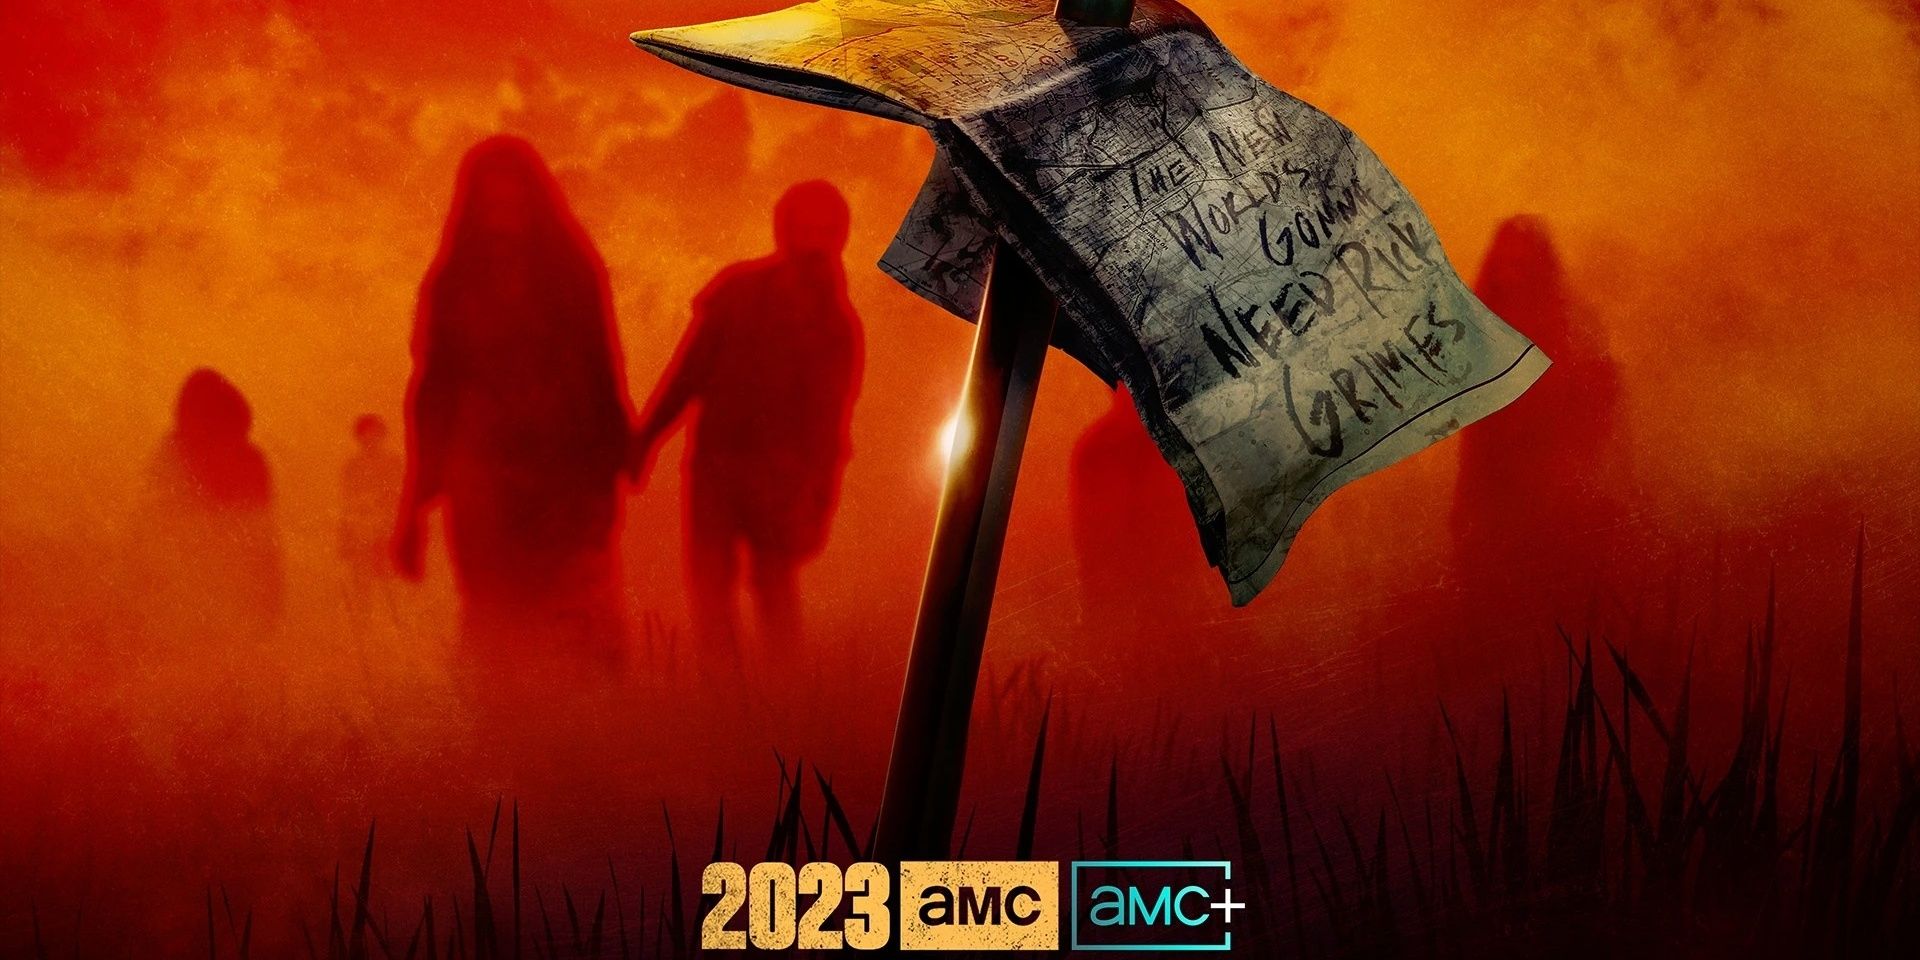 Rick & Michonne spinoff poster for The Walking Dead